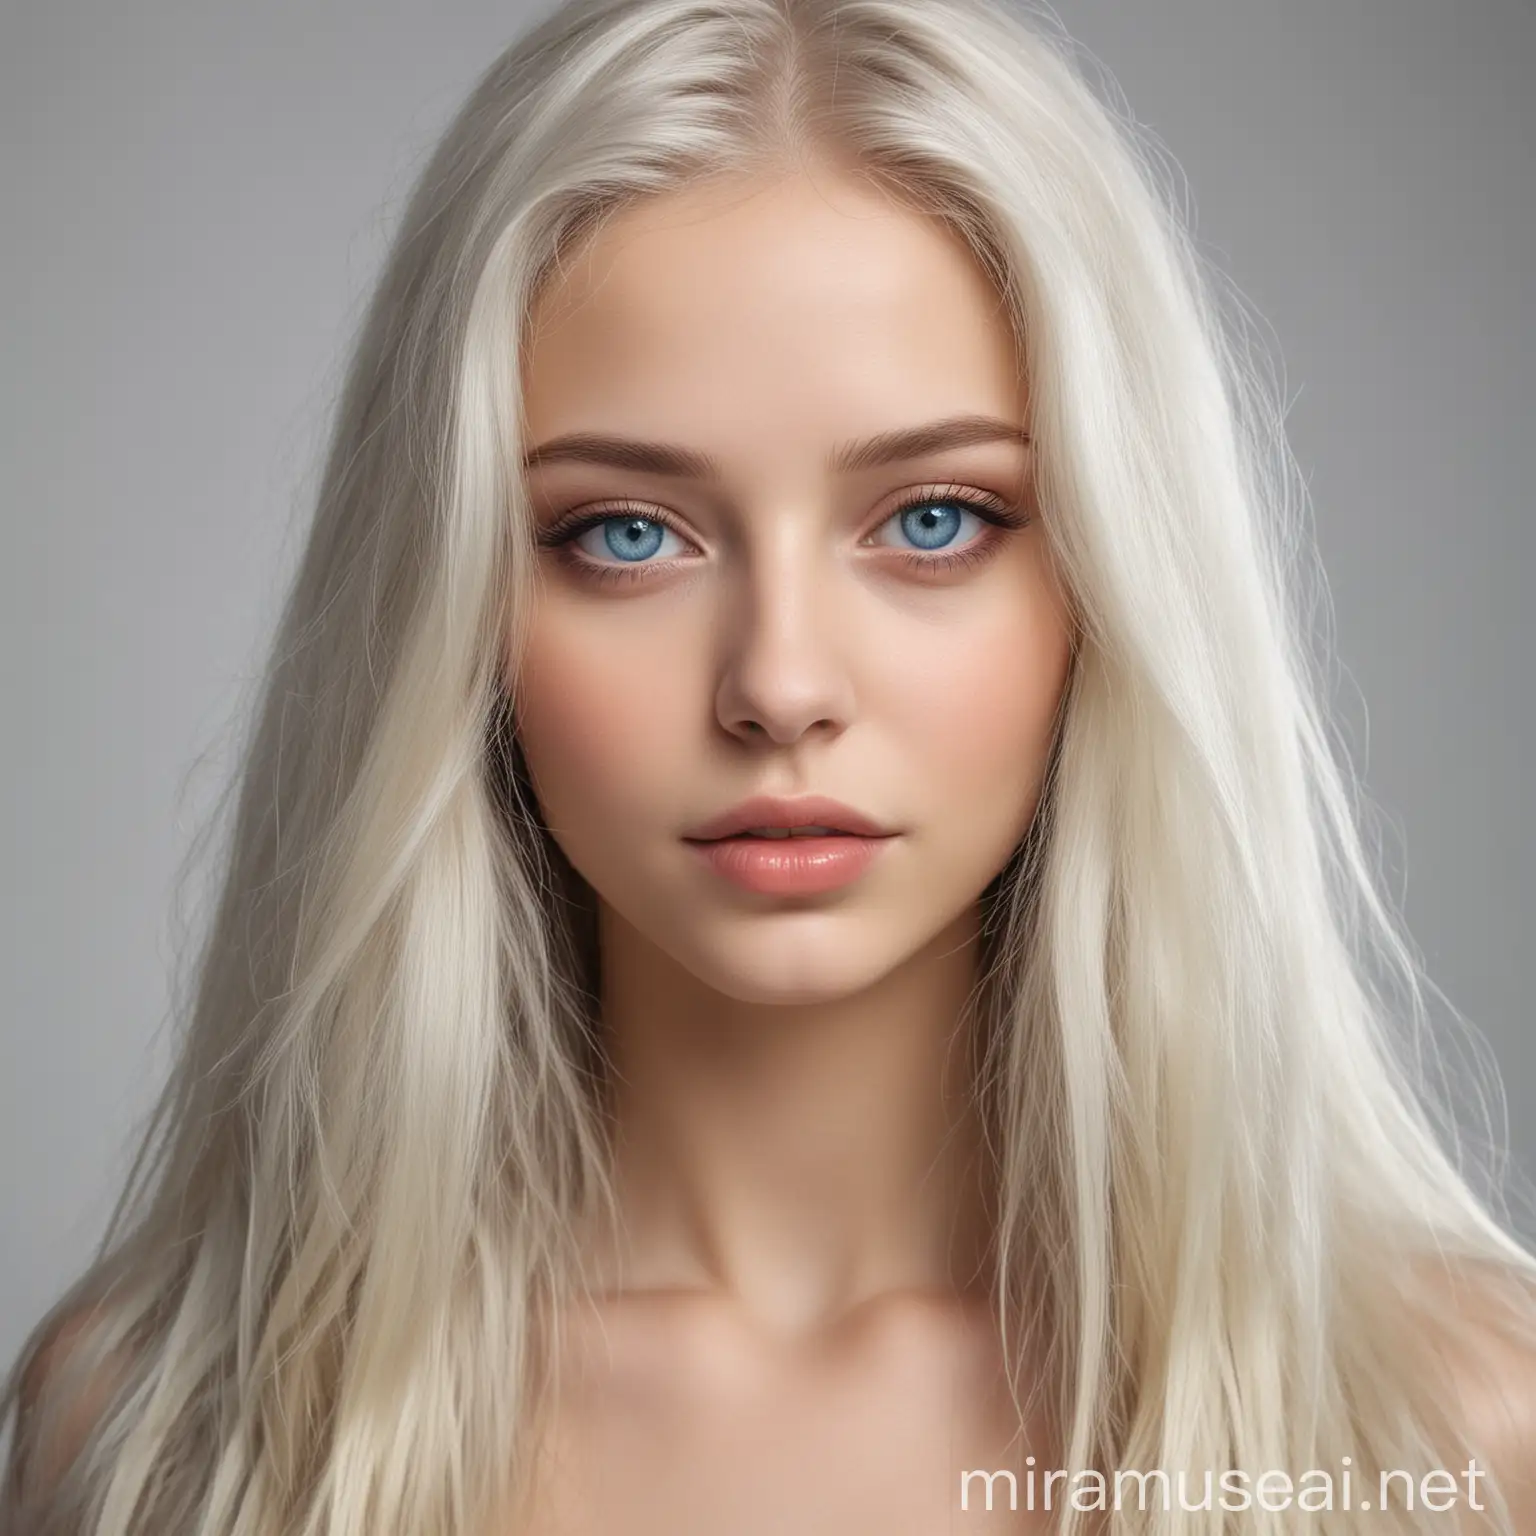 The girl is platinum blonde, with long hair. Gray-blue eyes, average nose, average lips.